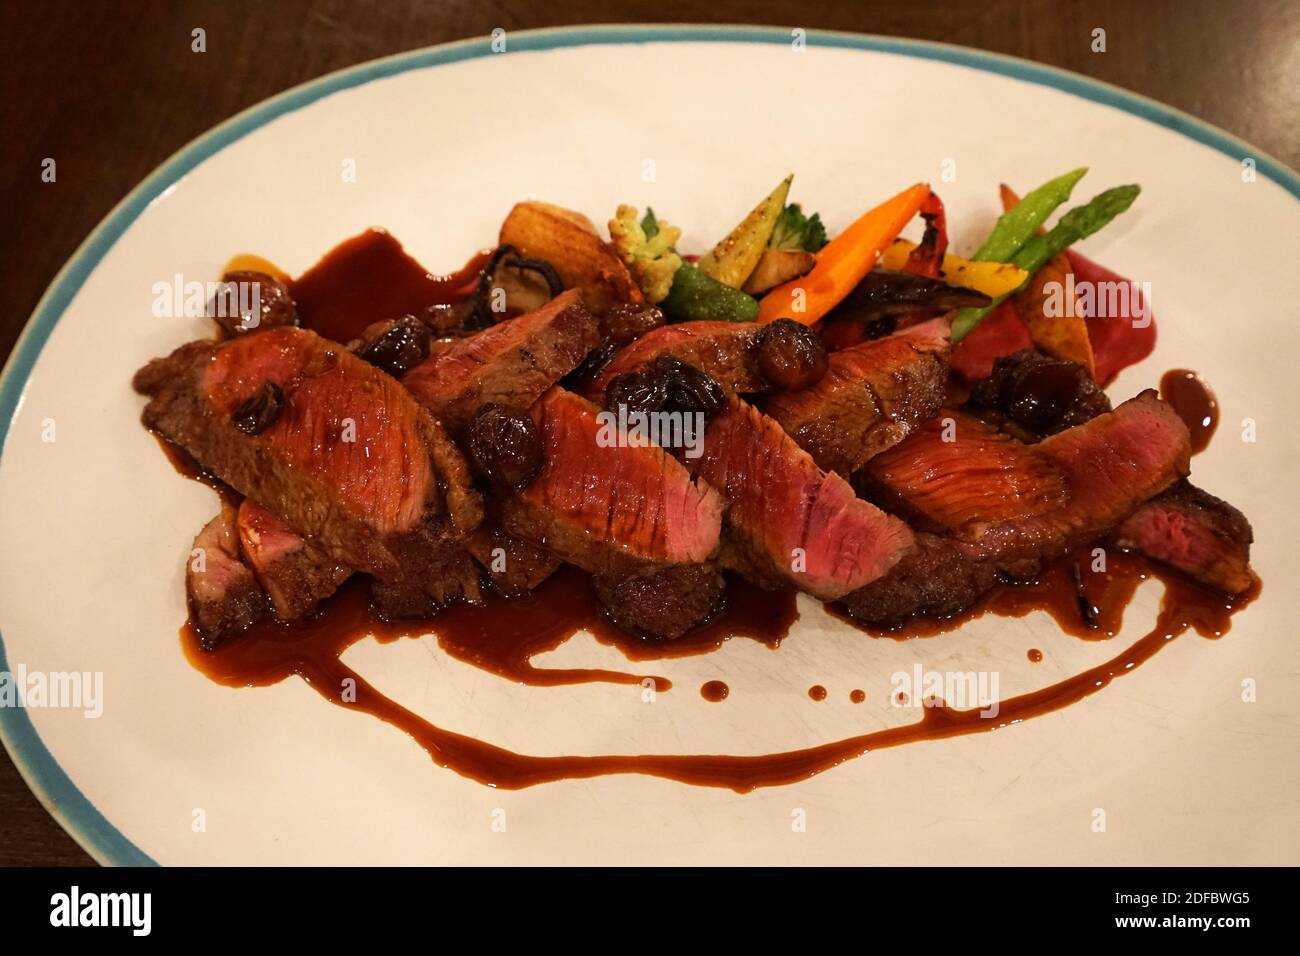 Close up Togliata di Manzo, Rib eye (black angus) steak with red wine and shallot sauce served with dally roasted vegetables Stock Photo